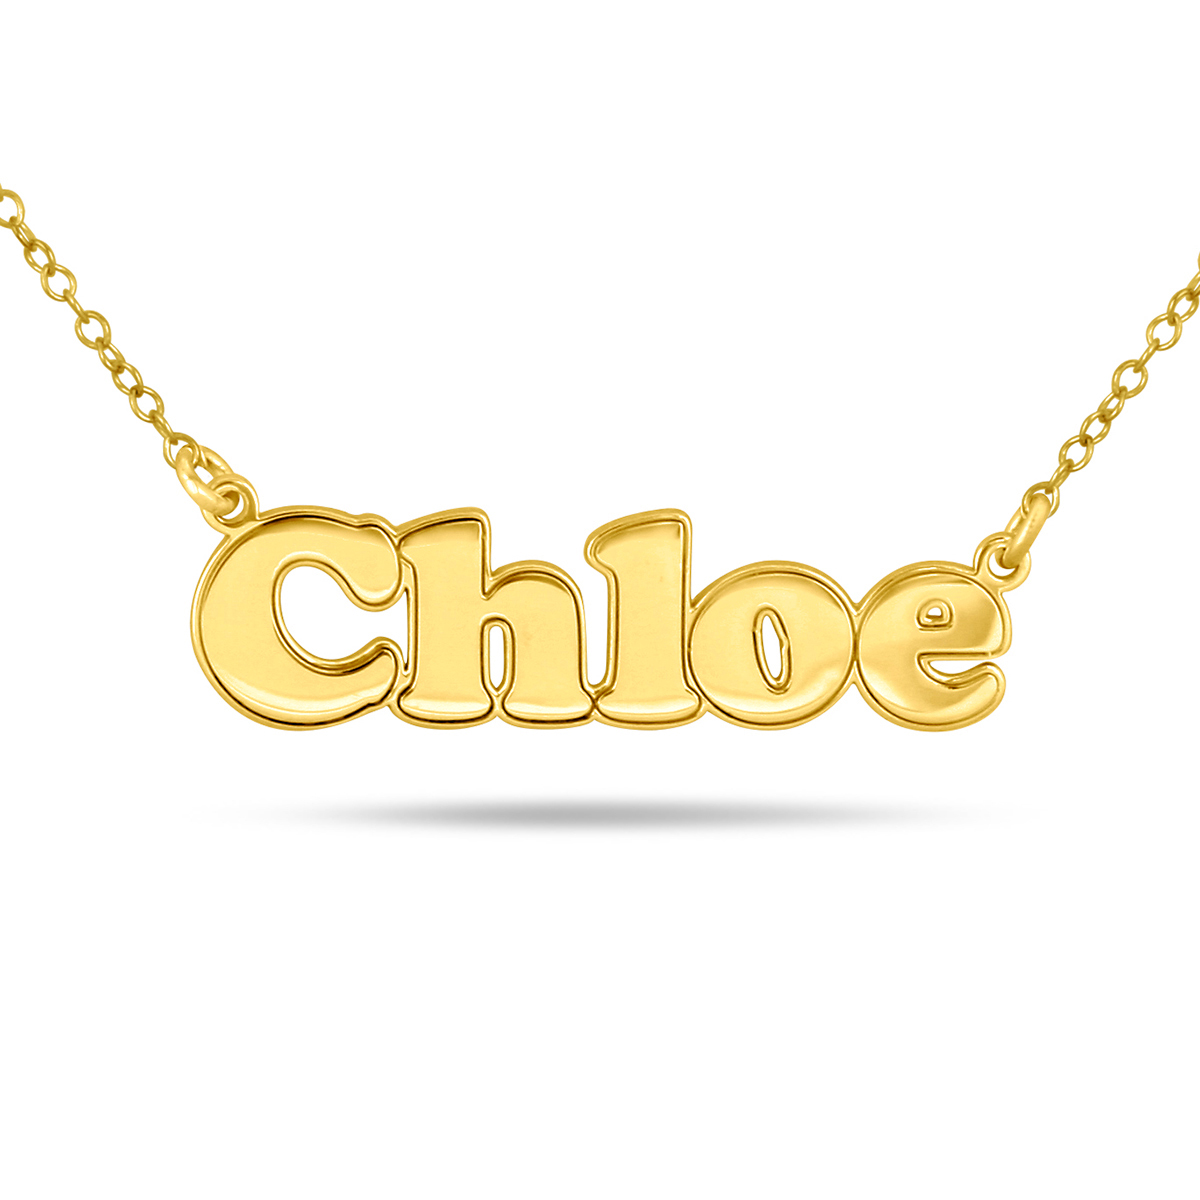 Custom Name Pendant Necklace in 24K Gold Plated Sterling Silver